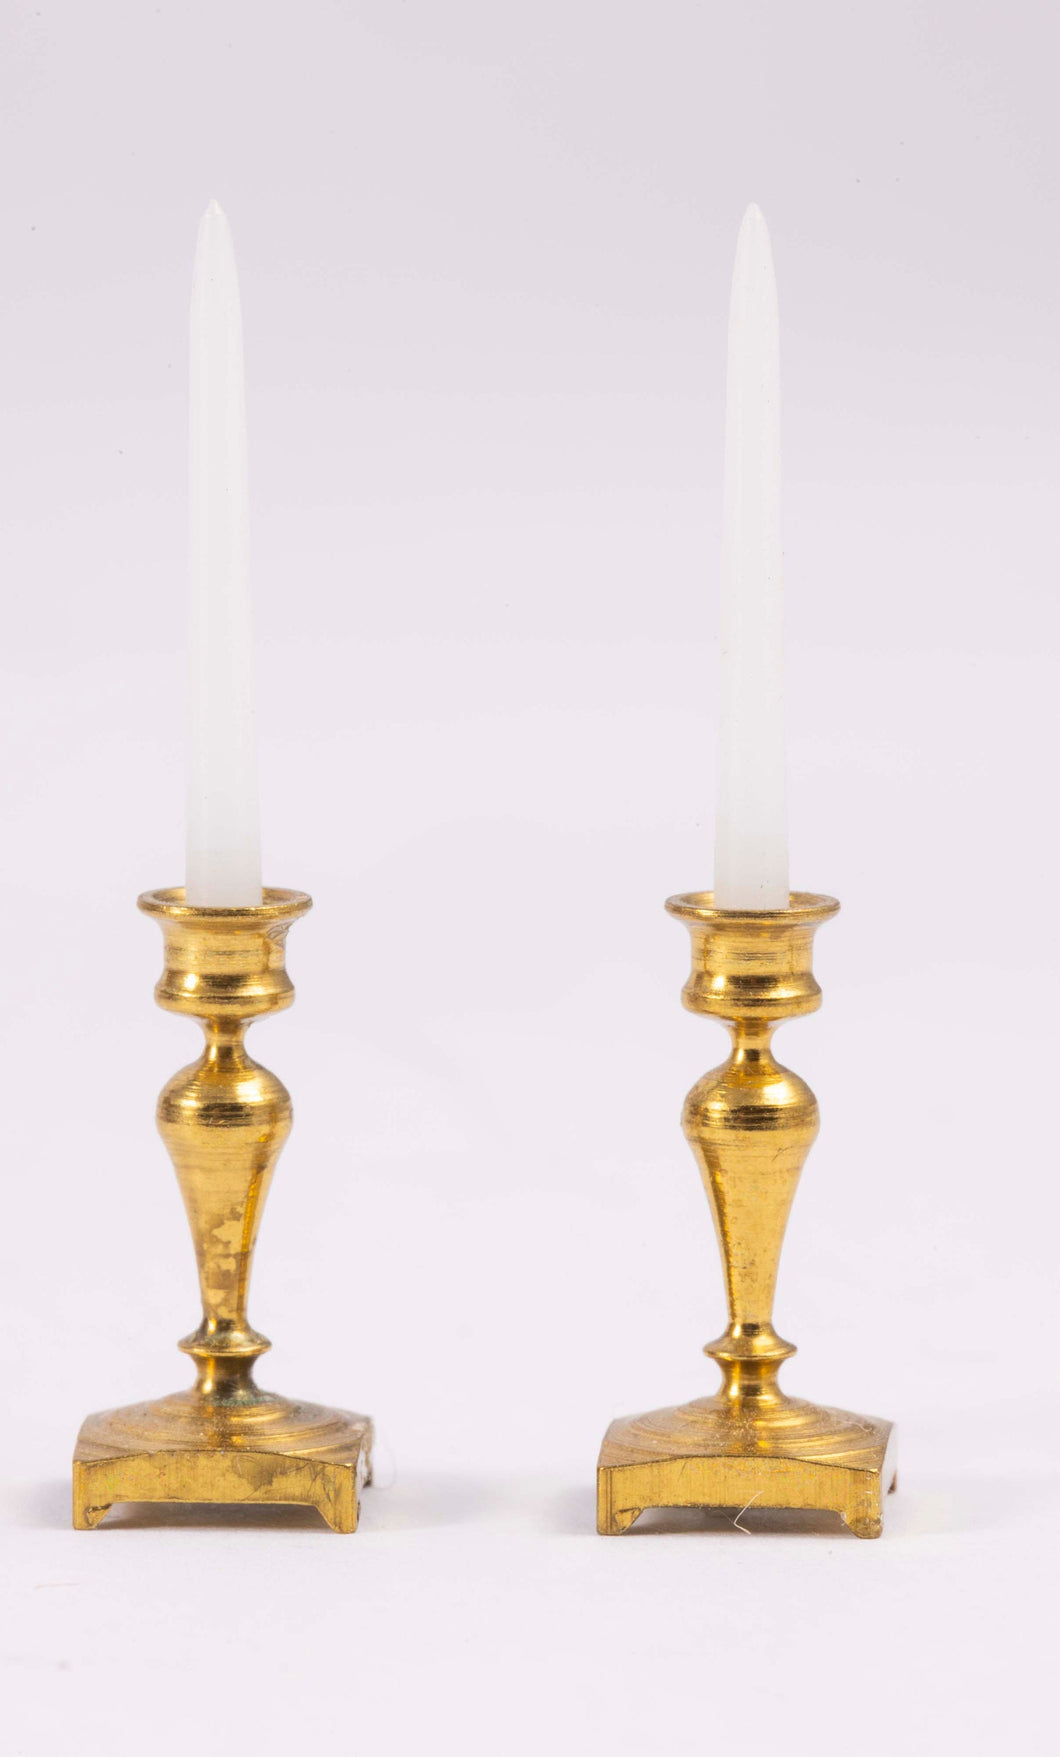 Dollhouse Miniature ~ Tretters Brass Candlesticks Pair,  From Lee Lefkowitz Collection